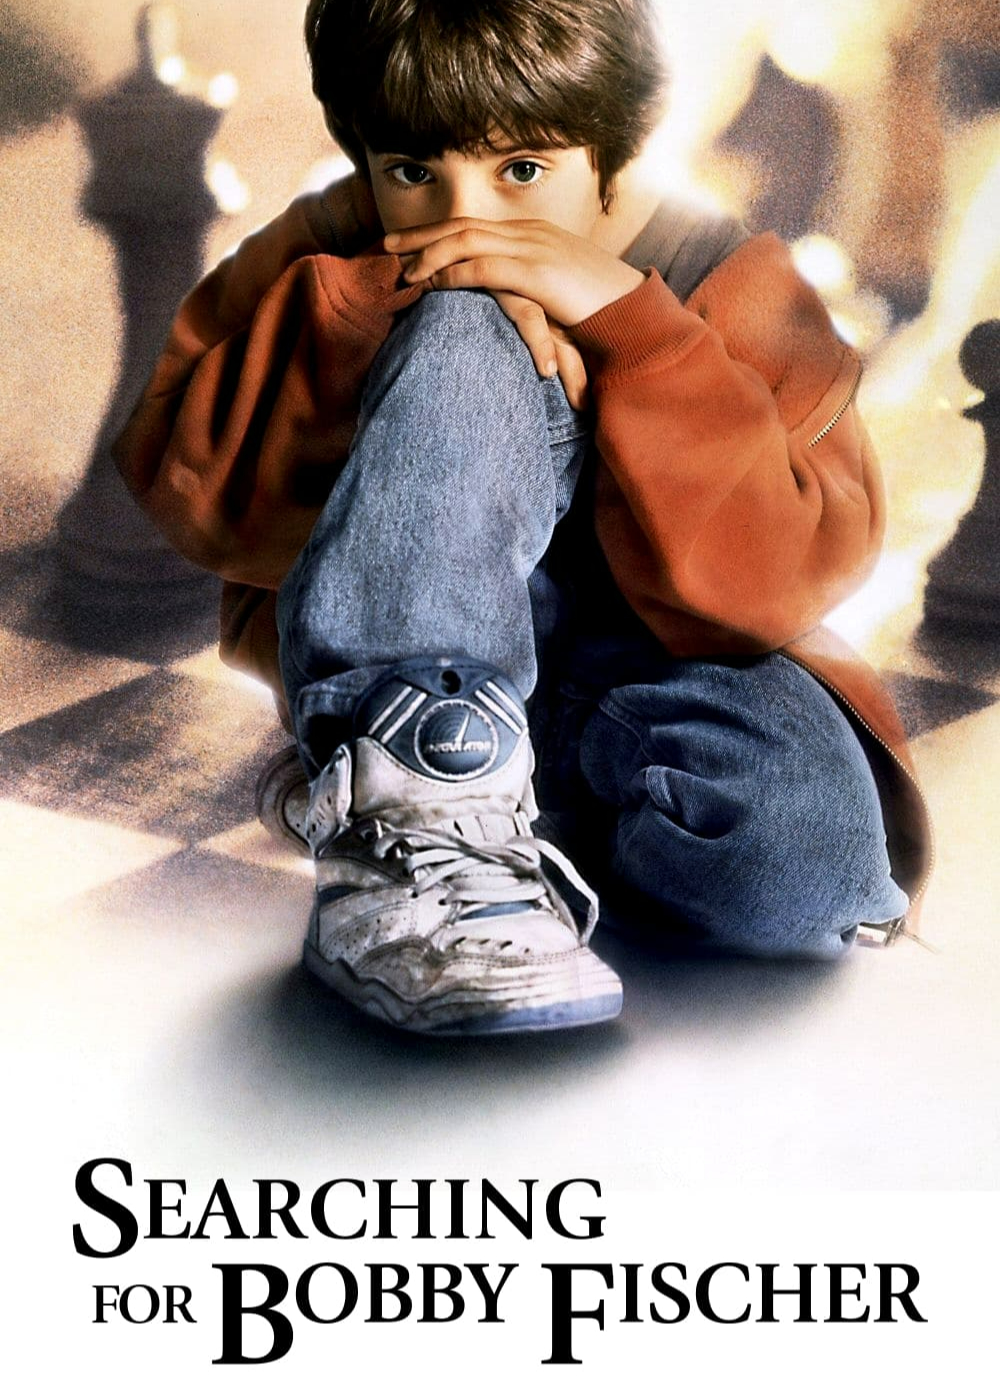 Searching for Bobby Fischer - Searching for Bobby Fischer (1993)